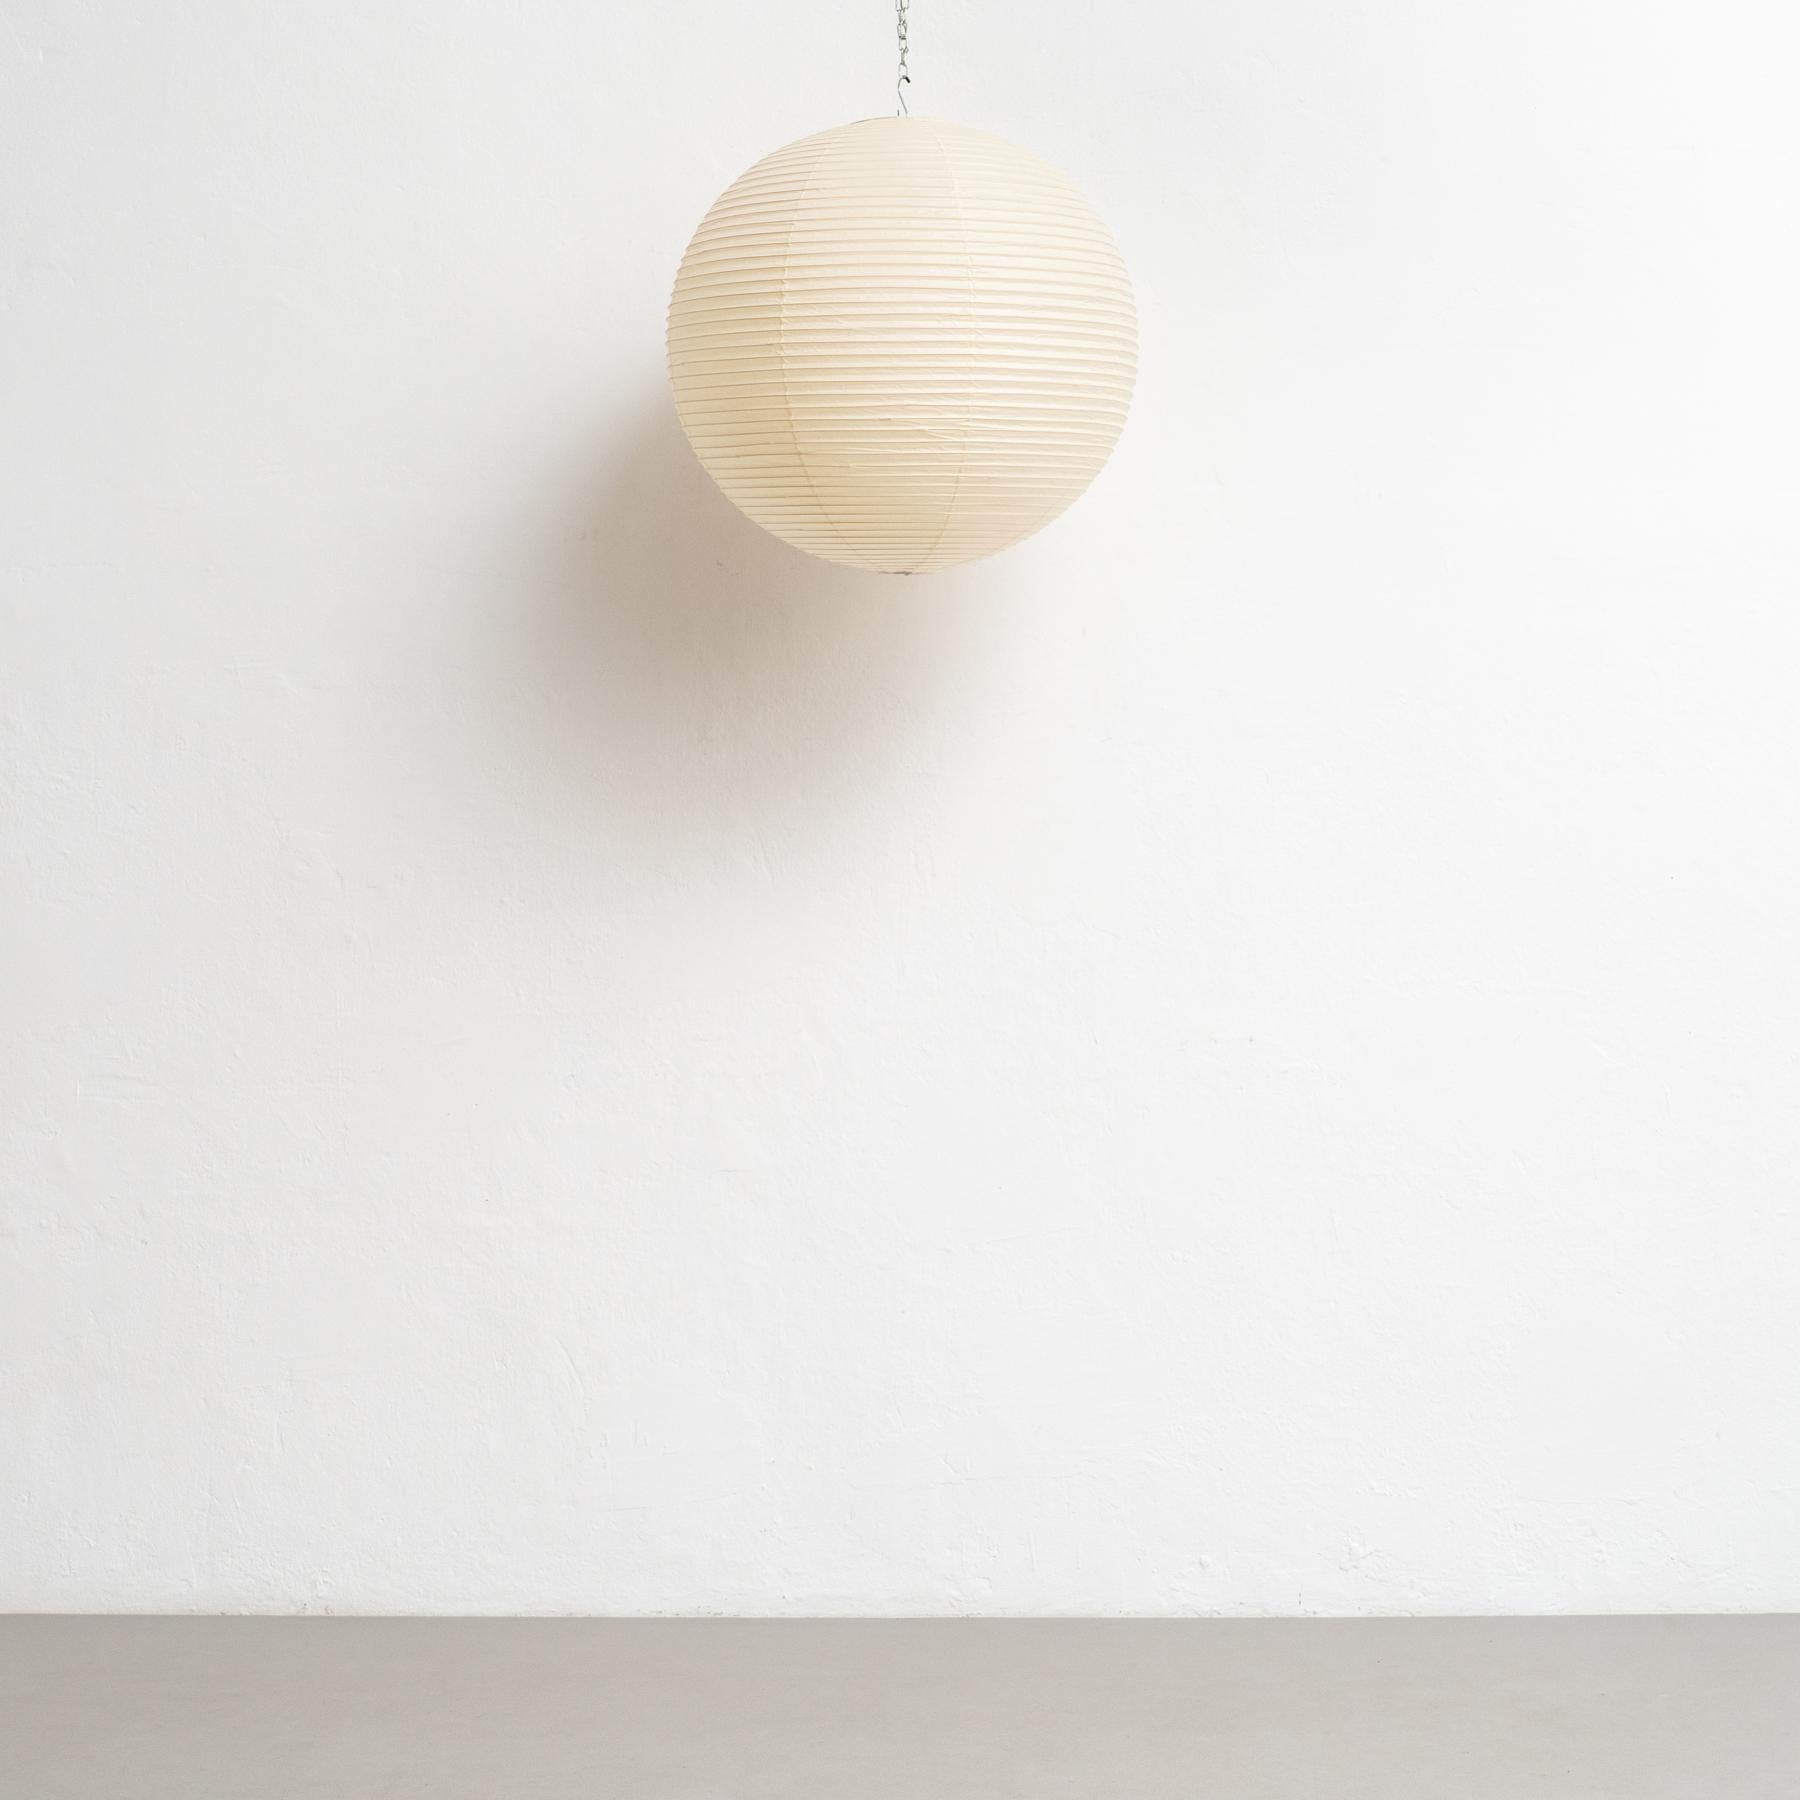 Experience the timeless elegance of the Isamu Noguchi Akari 55A Pendant Lamp, a design masterpiece that transcends generations. Created in 1951 and expertly manufactured by Ozeki & Co. in Japan around 1980, this lamp showcases the enduring legacy of